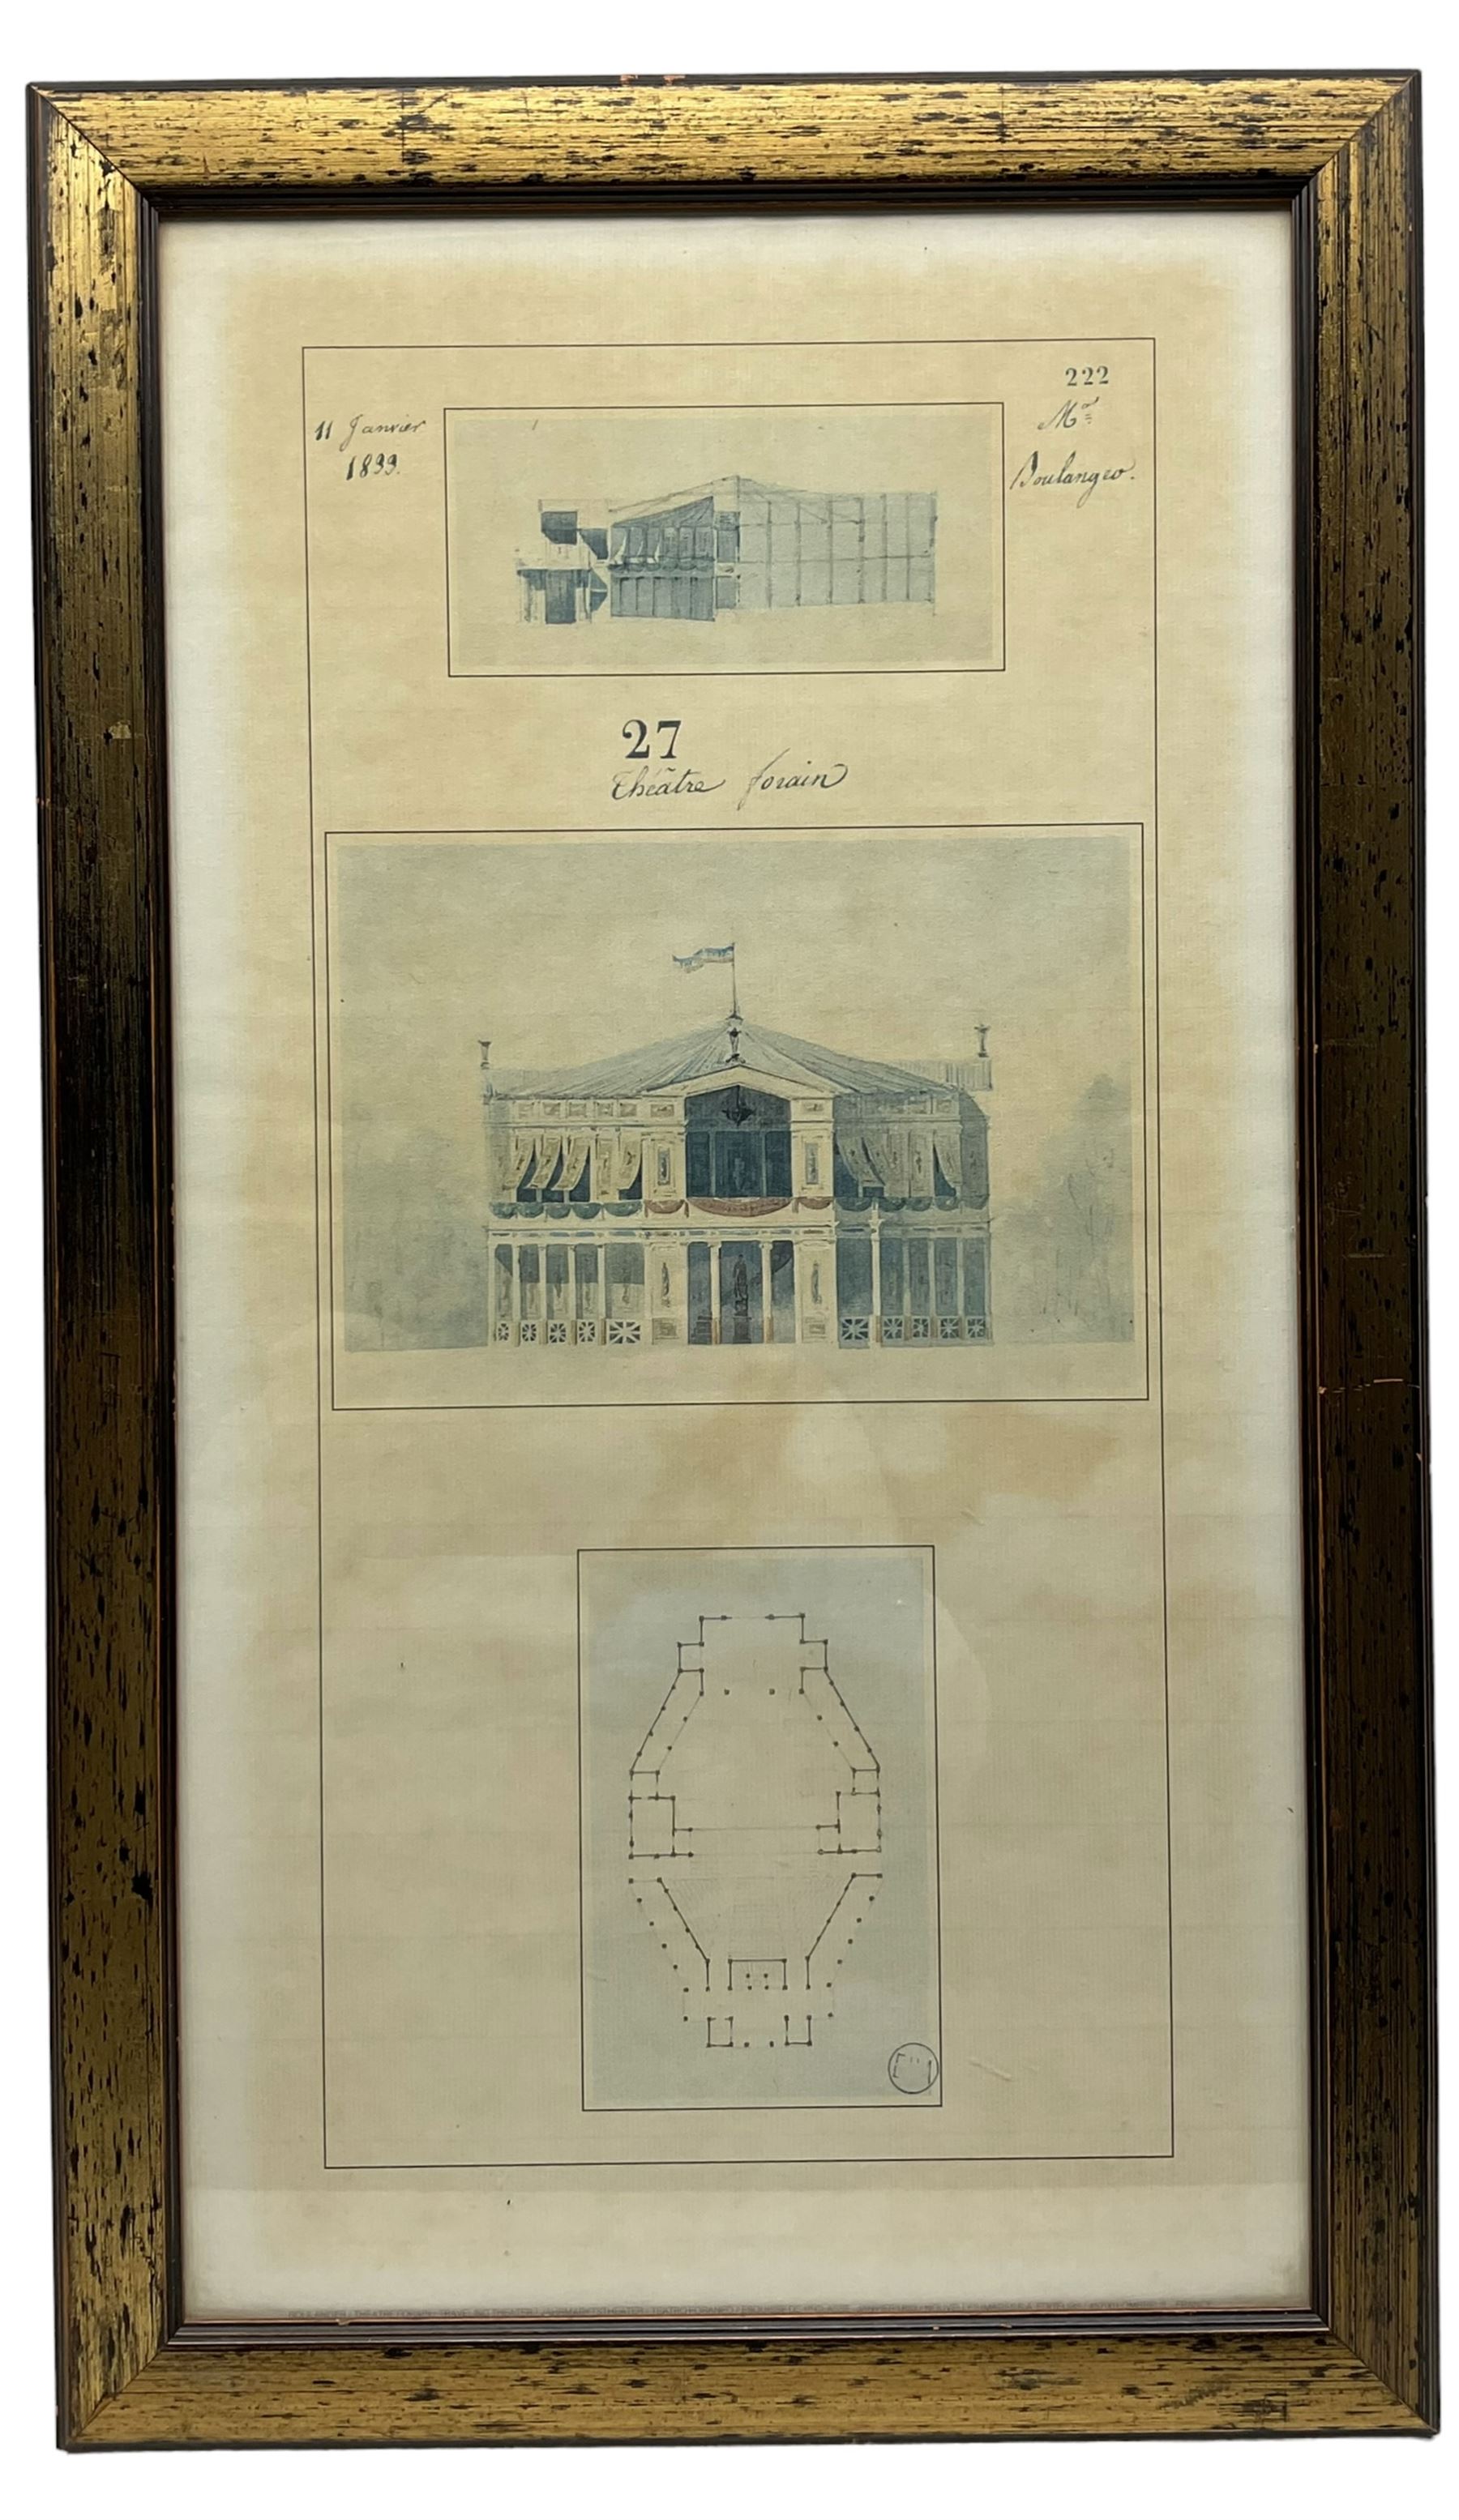 After the Architectural School of Paris (c1906): Designs for the National Museum of Natural History - Image 6 of 8